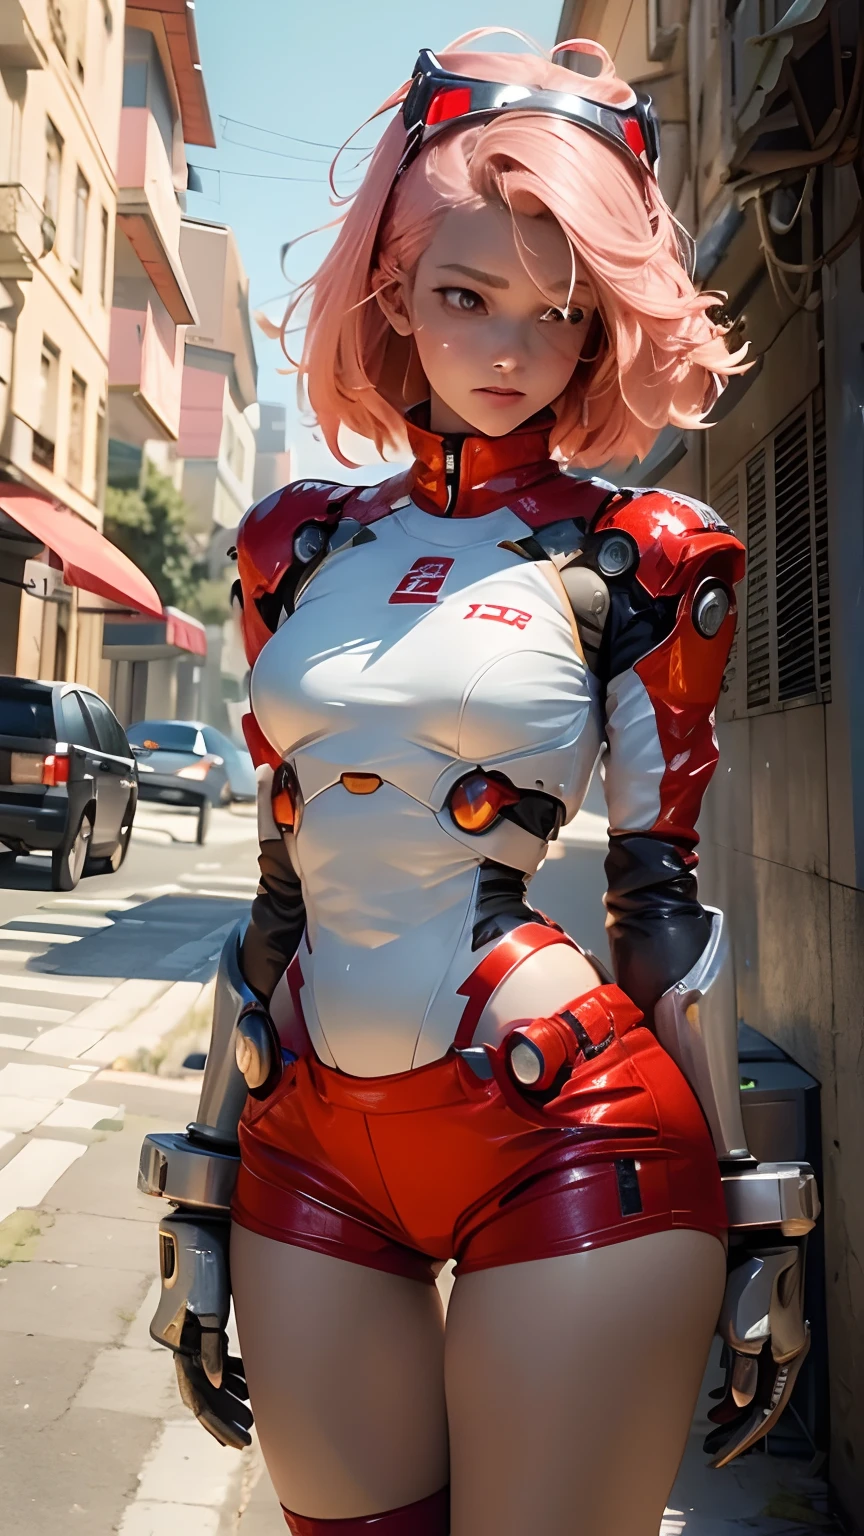 Alafi standing in the street in red and white, girl in mecha cyber armor, Cute cyborg girl, perfect android girl, cybersuit, cyber suit, Robot girl, Cyborg girl, sci-fi woman, anime robots, perfect anime cyborg woman, cyborg - girl, Mecha suit, japanese cyborg, science fiction suit, Red armor